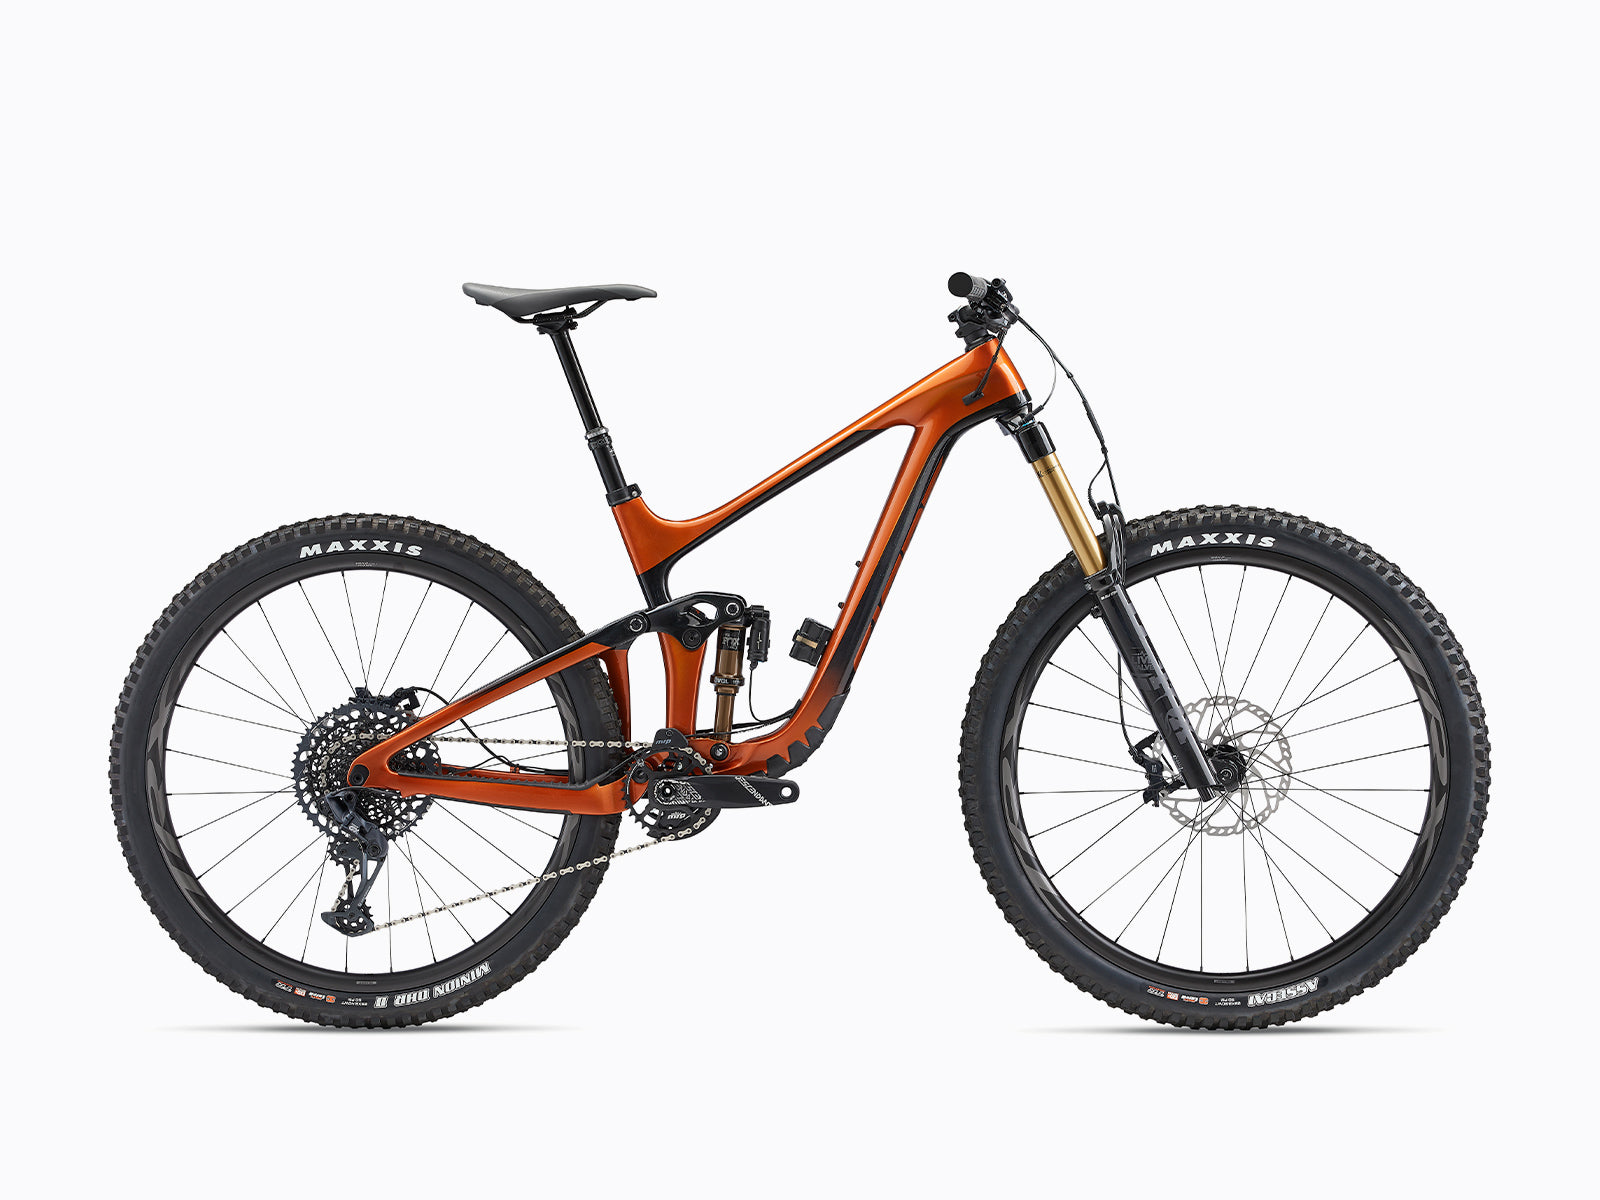 Image shows, giant reign advanced pro 29 1, a hardtail mountain bike from Giant